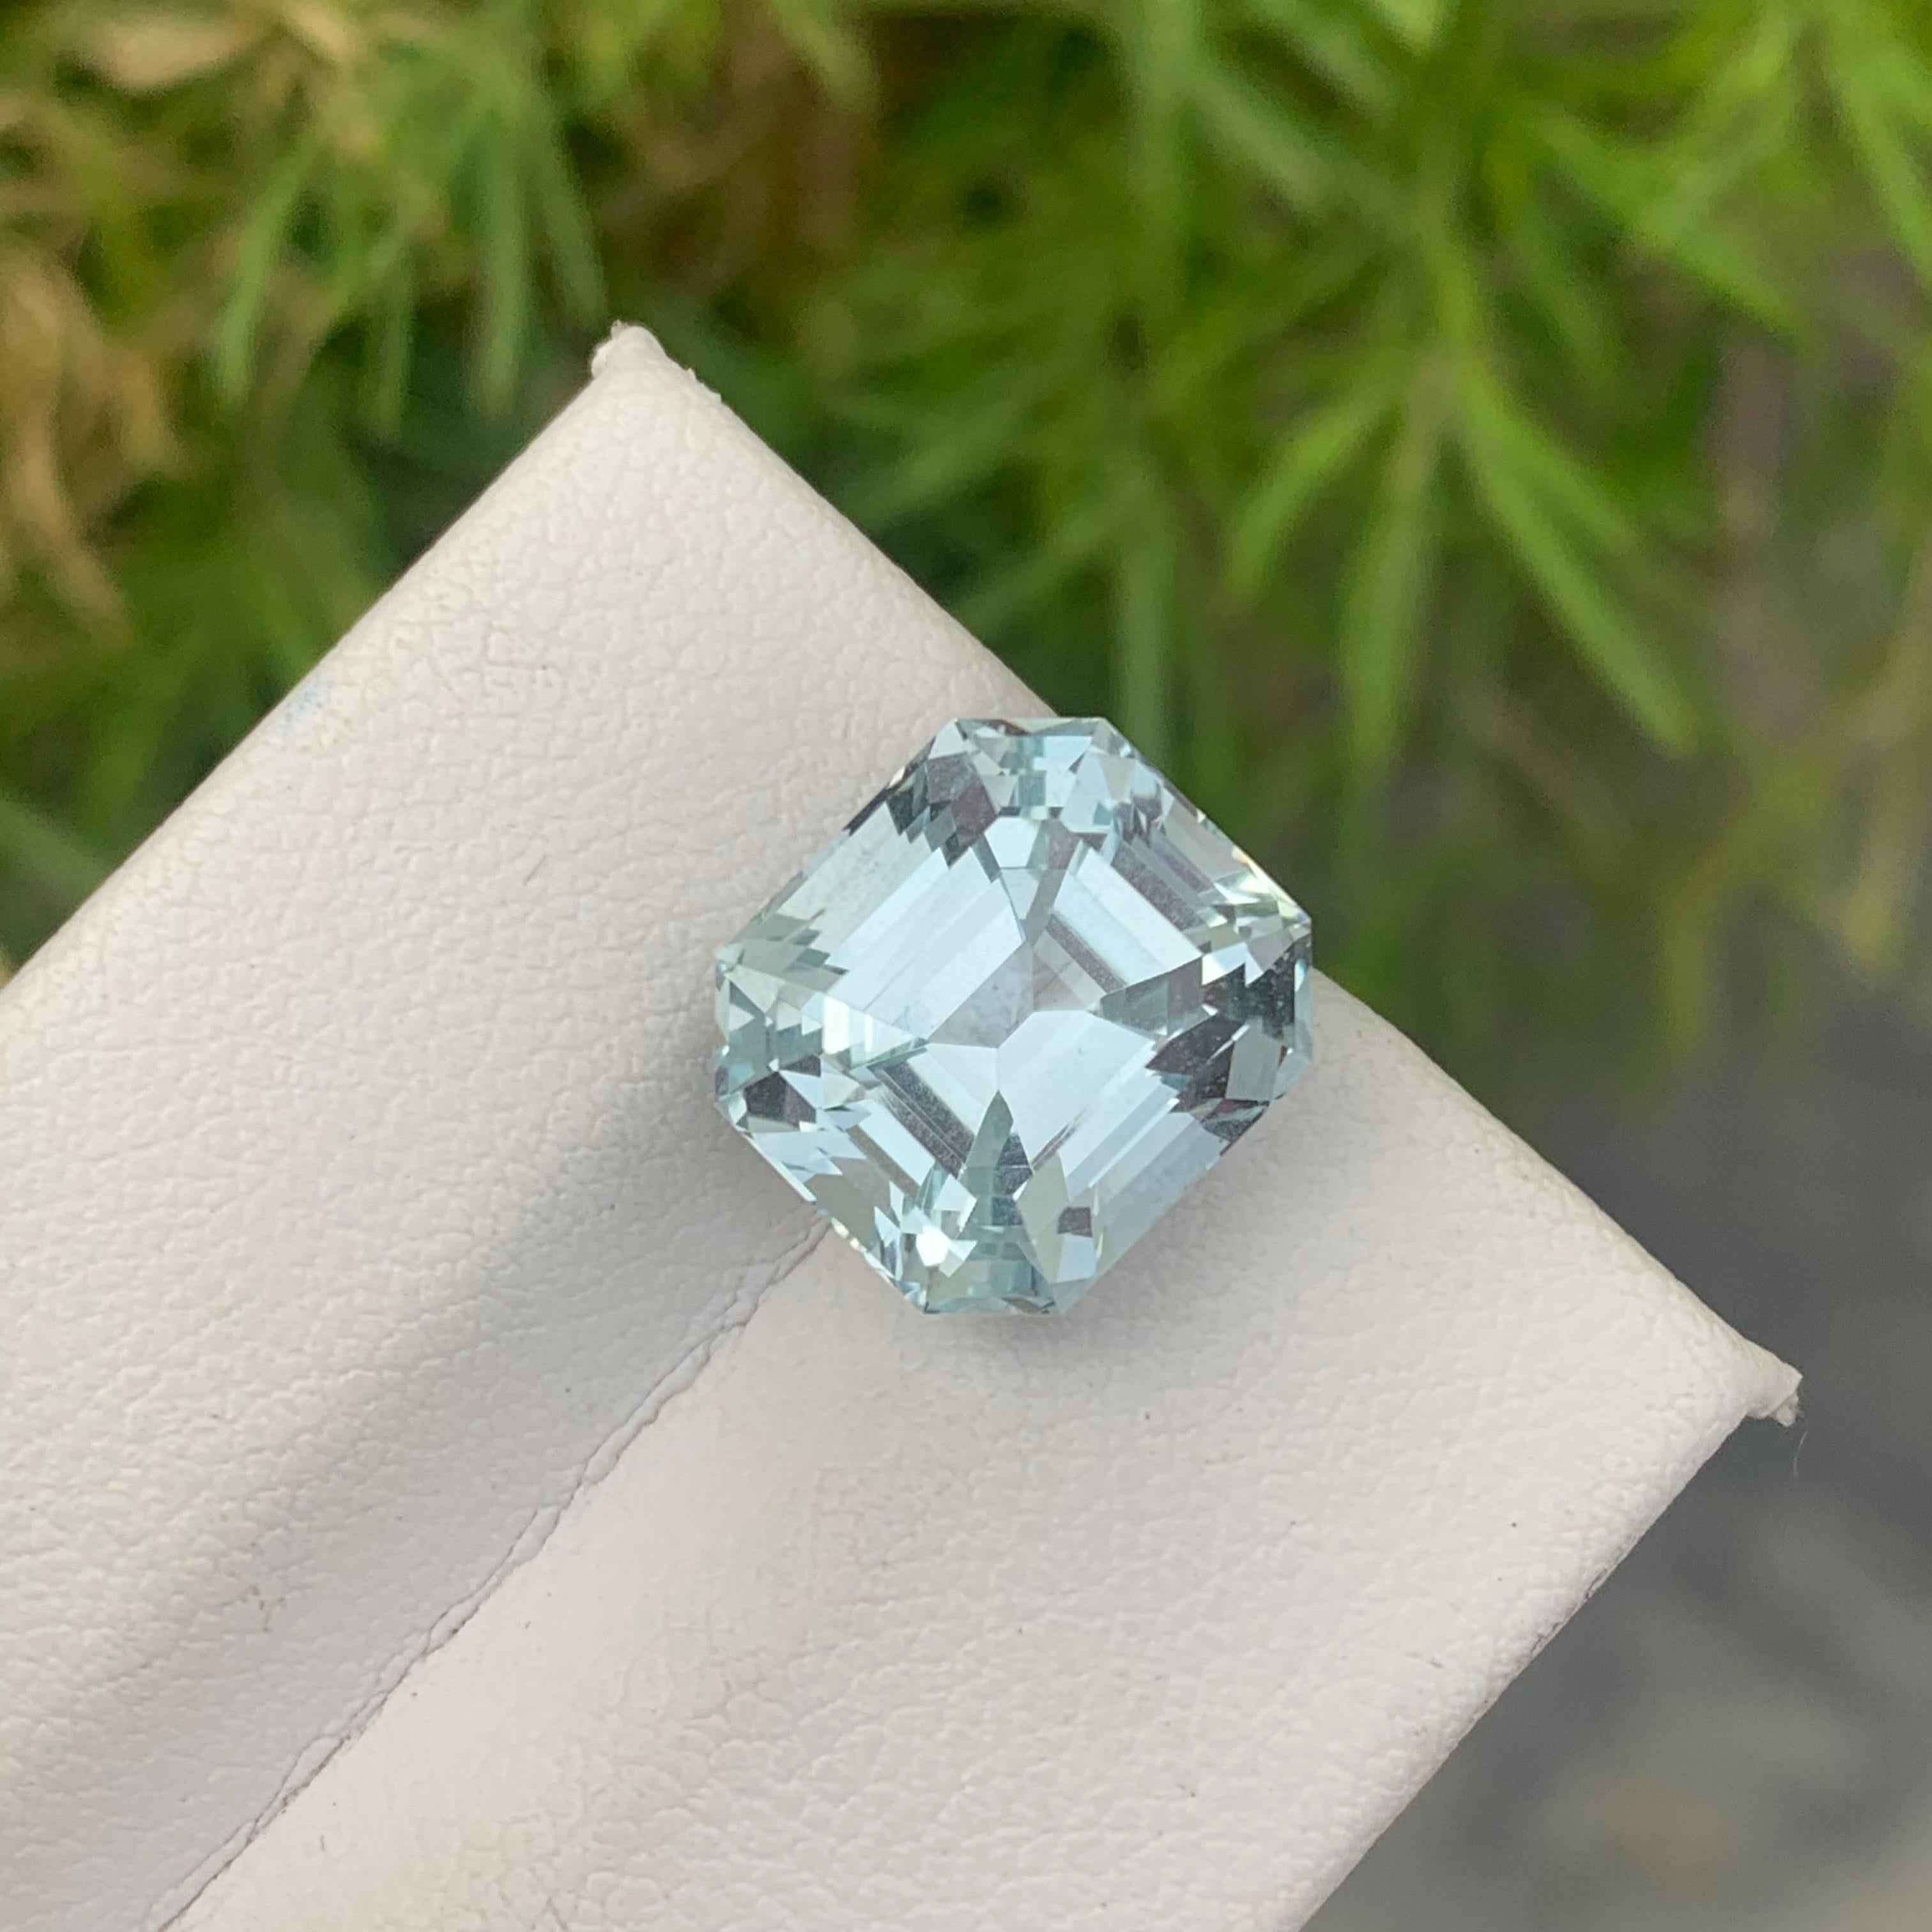 Faceted Aquamarine
Weight: 7.10 Carats
Dimension: 11.5x10.4x8.8 Mm
Origin: Shigar Valley Pakistan
Color: Light Blue
Birth Month: March
Treatment: Non
Certificate: On Demand
Some basic benefits of wearing Aquamarine Gemstone:
Attracts money.
Brings